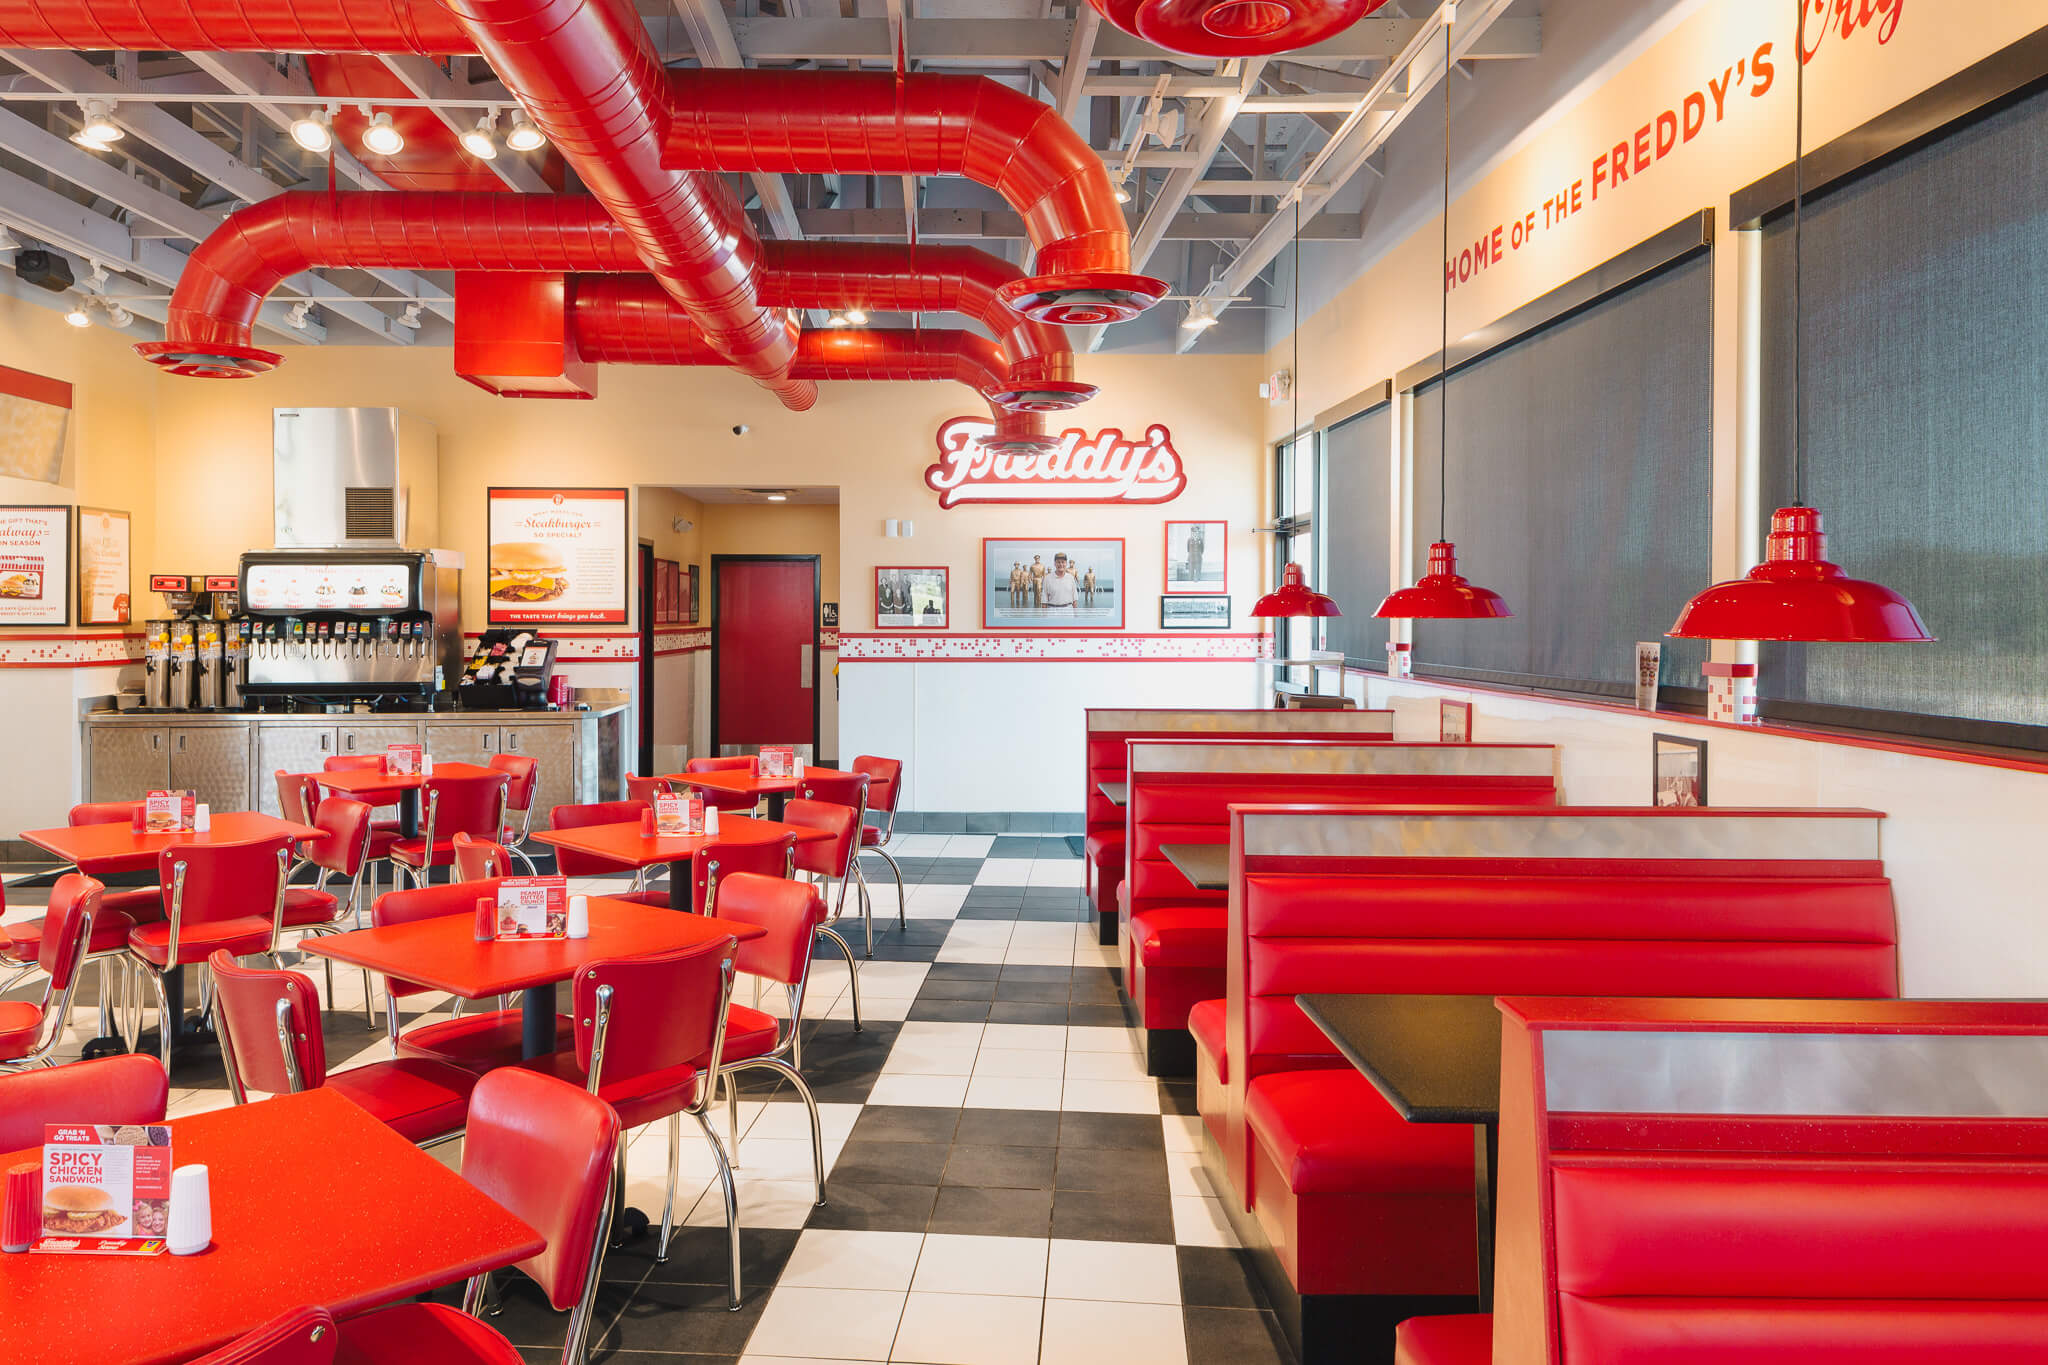 Updated Freddy's Menu Prices w/ Current Discounts (2023)